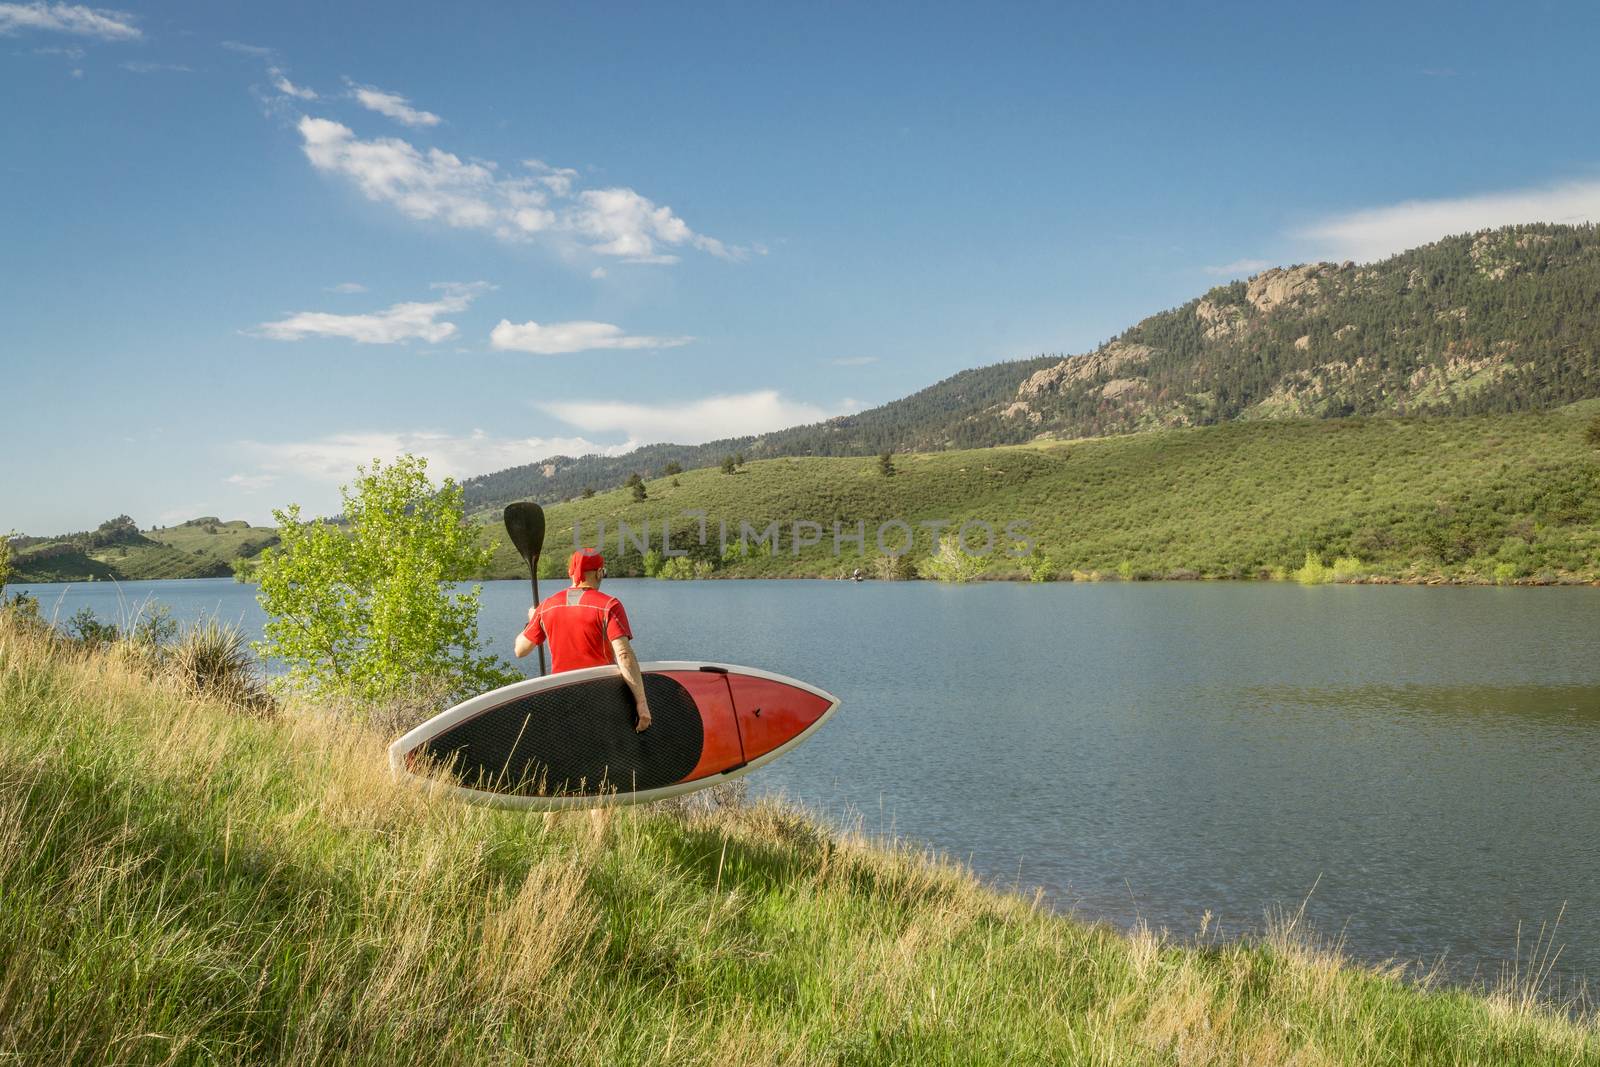 stand up paddling (SUP) in Colorado by PixelsAway